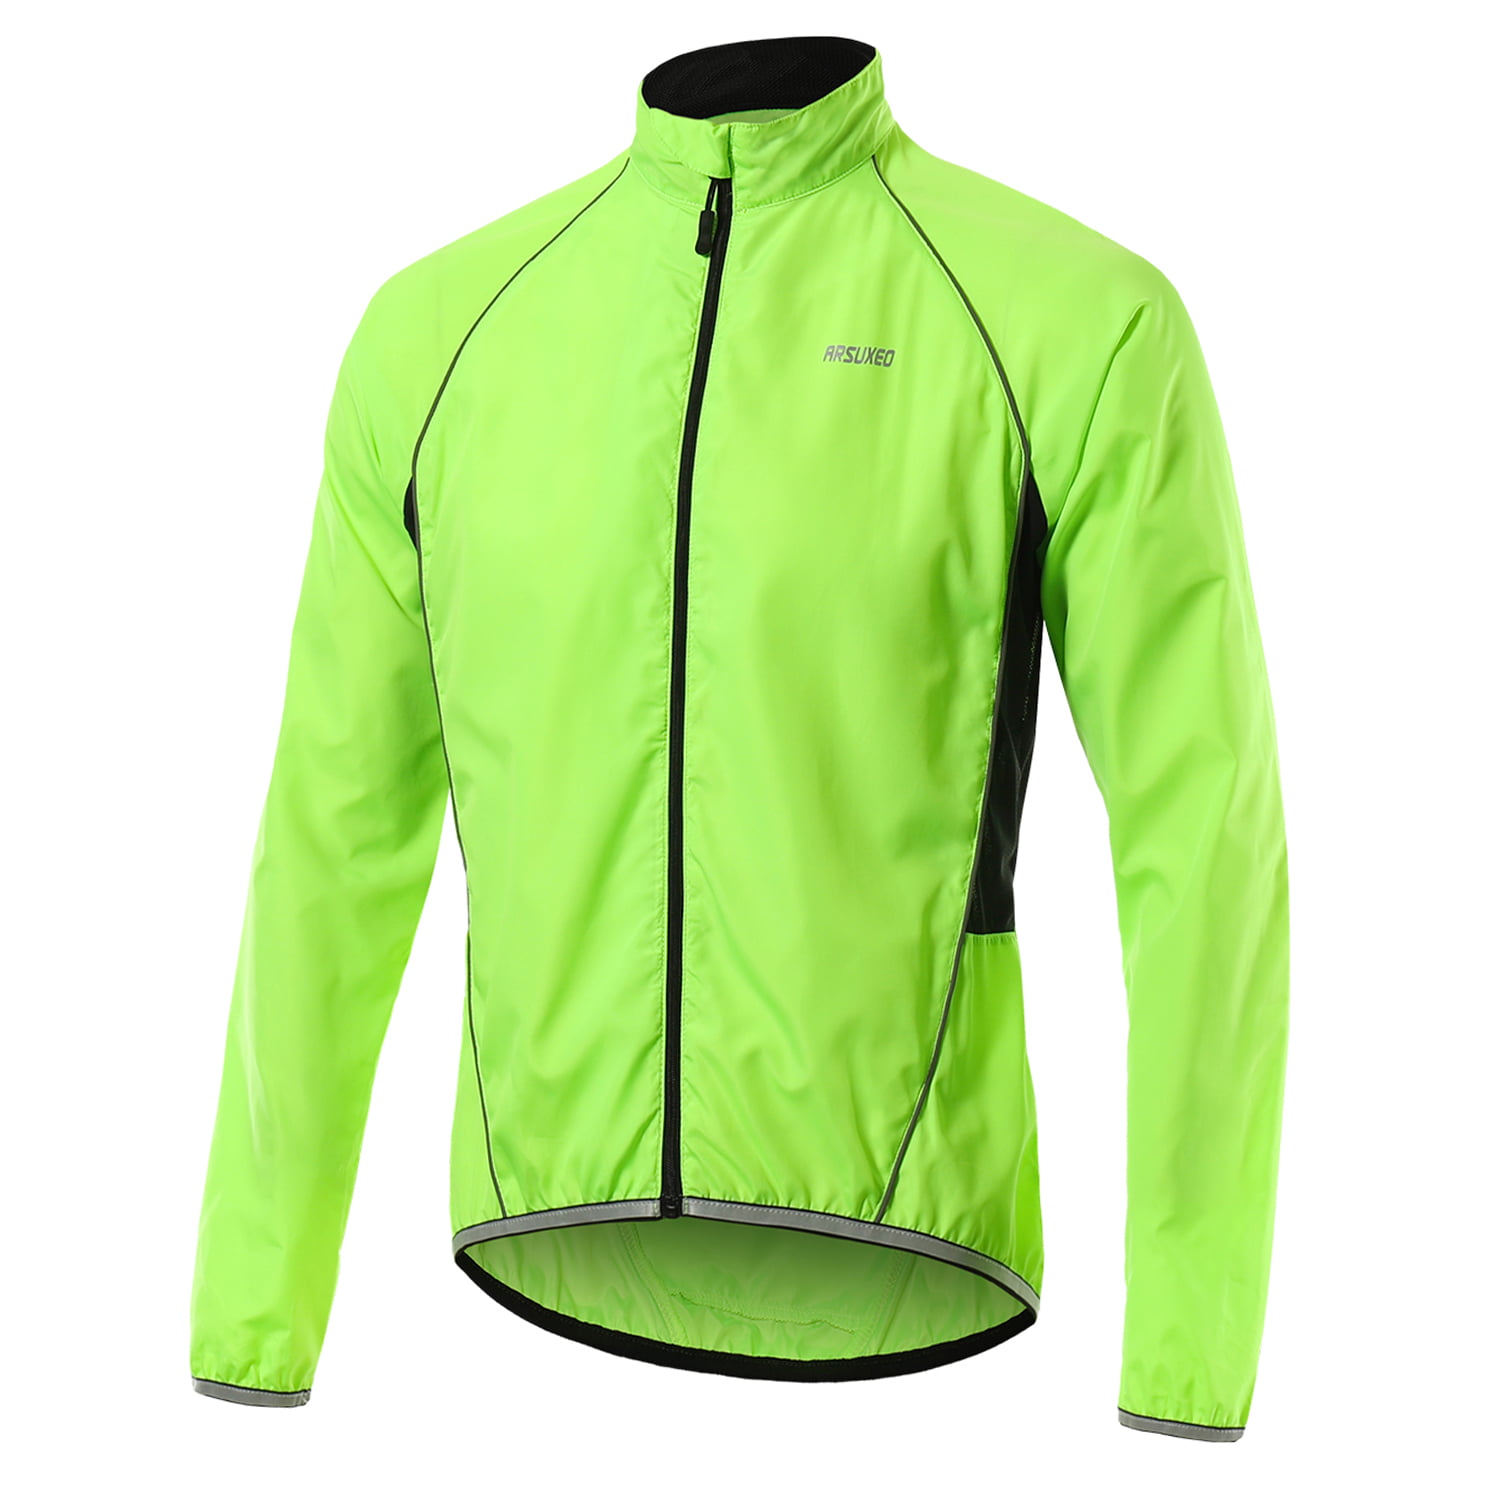 Men Bike Jersey Full Zipper for Men Outdoor Cycling Jacket Breathable Cycle Tops 